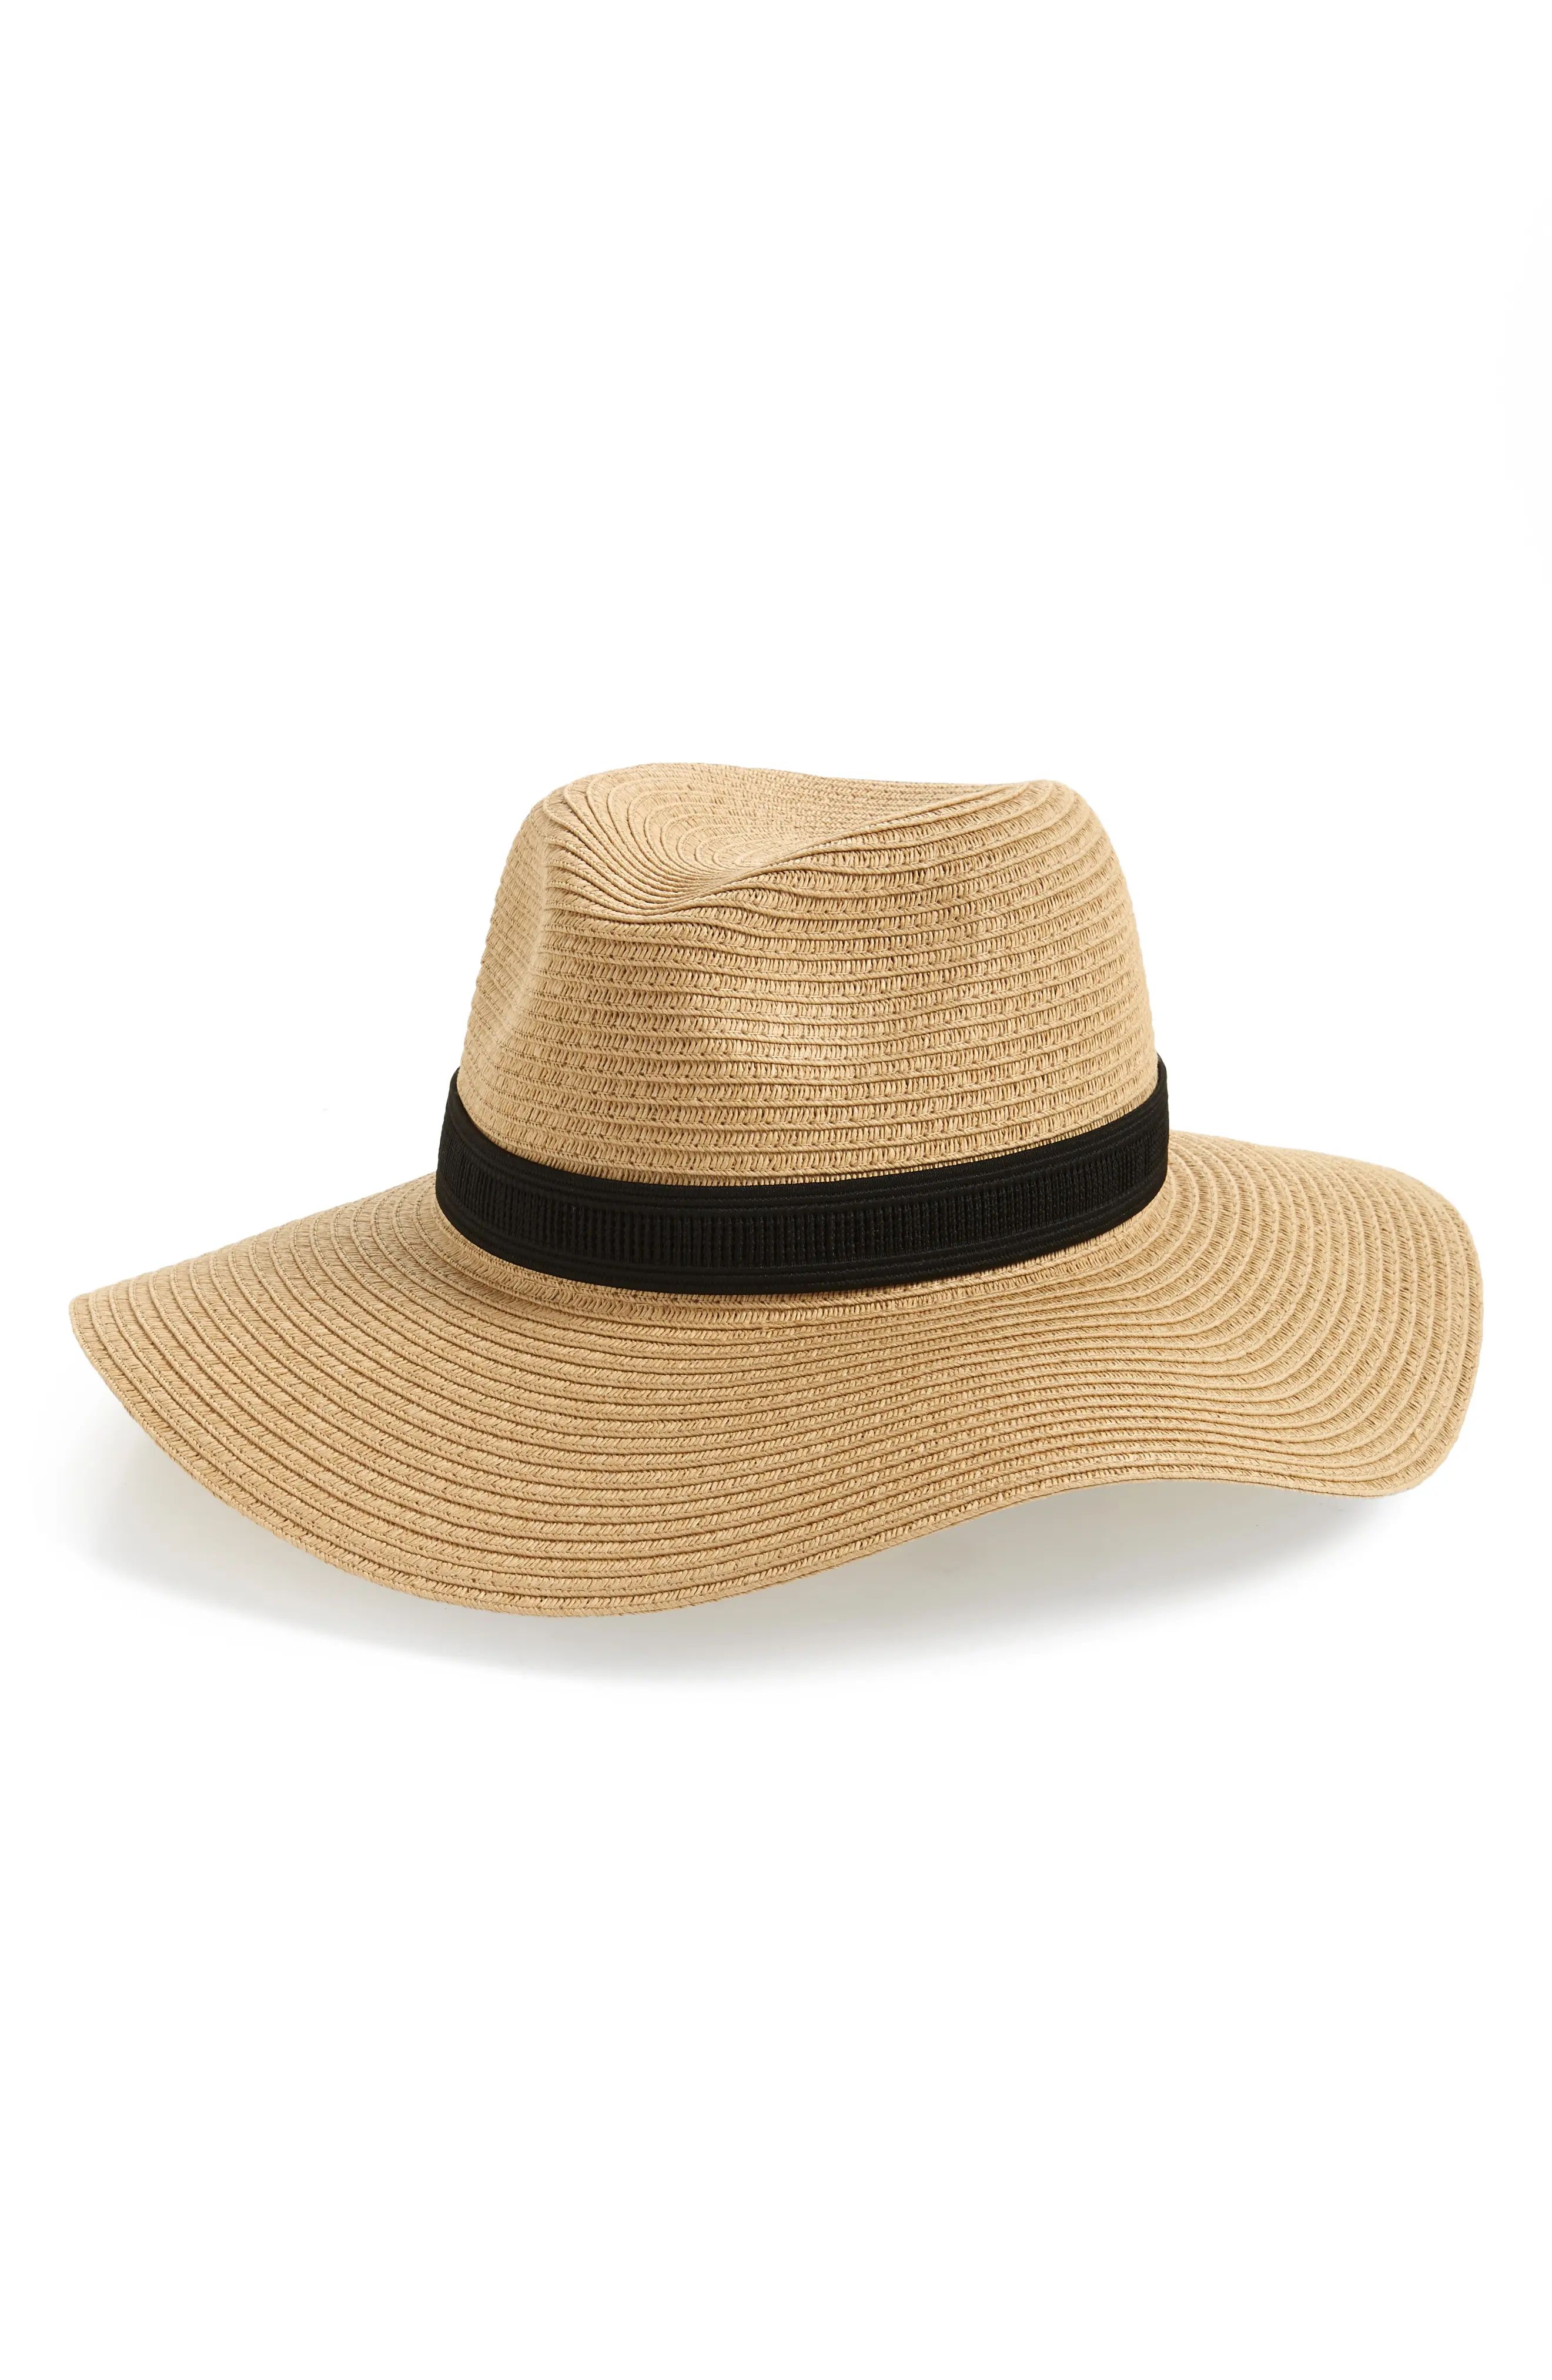 Women's Madewell Mesa Packable Straw Hat, Size Medium/Large - Beige | Nordstrom